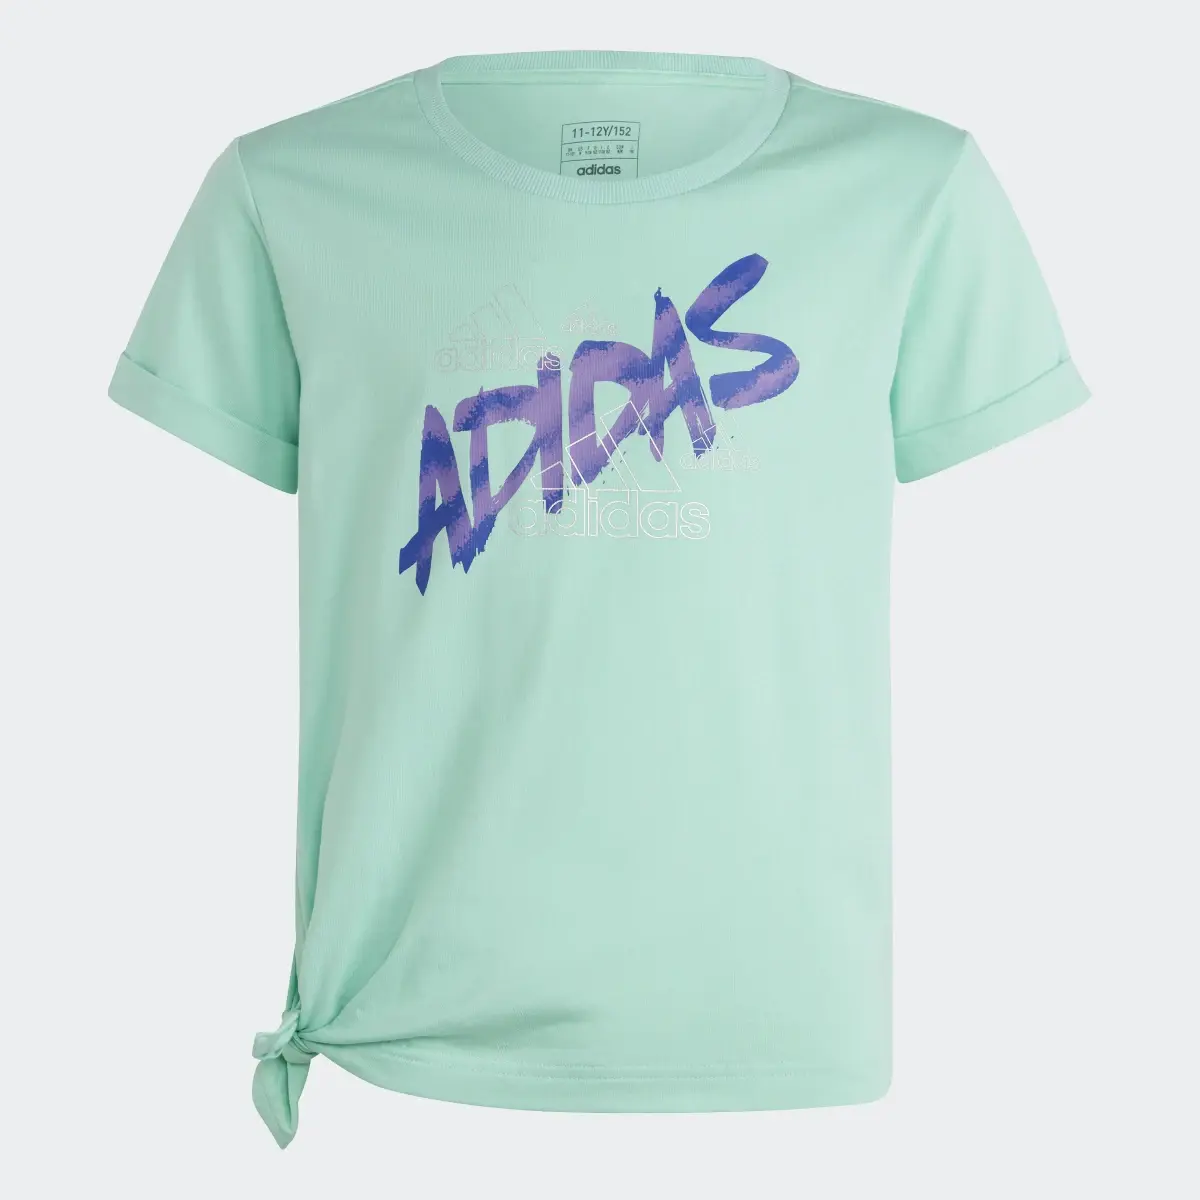 Adidas Maglia Dance Knotted. 1